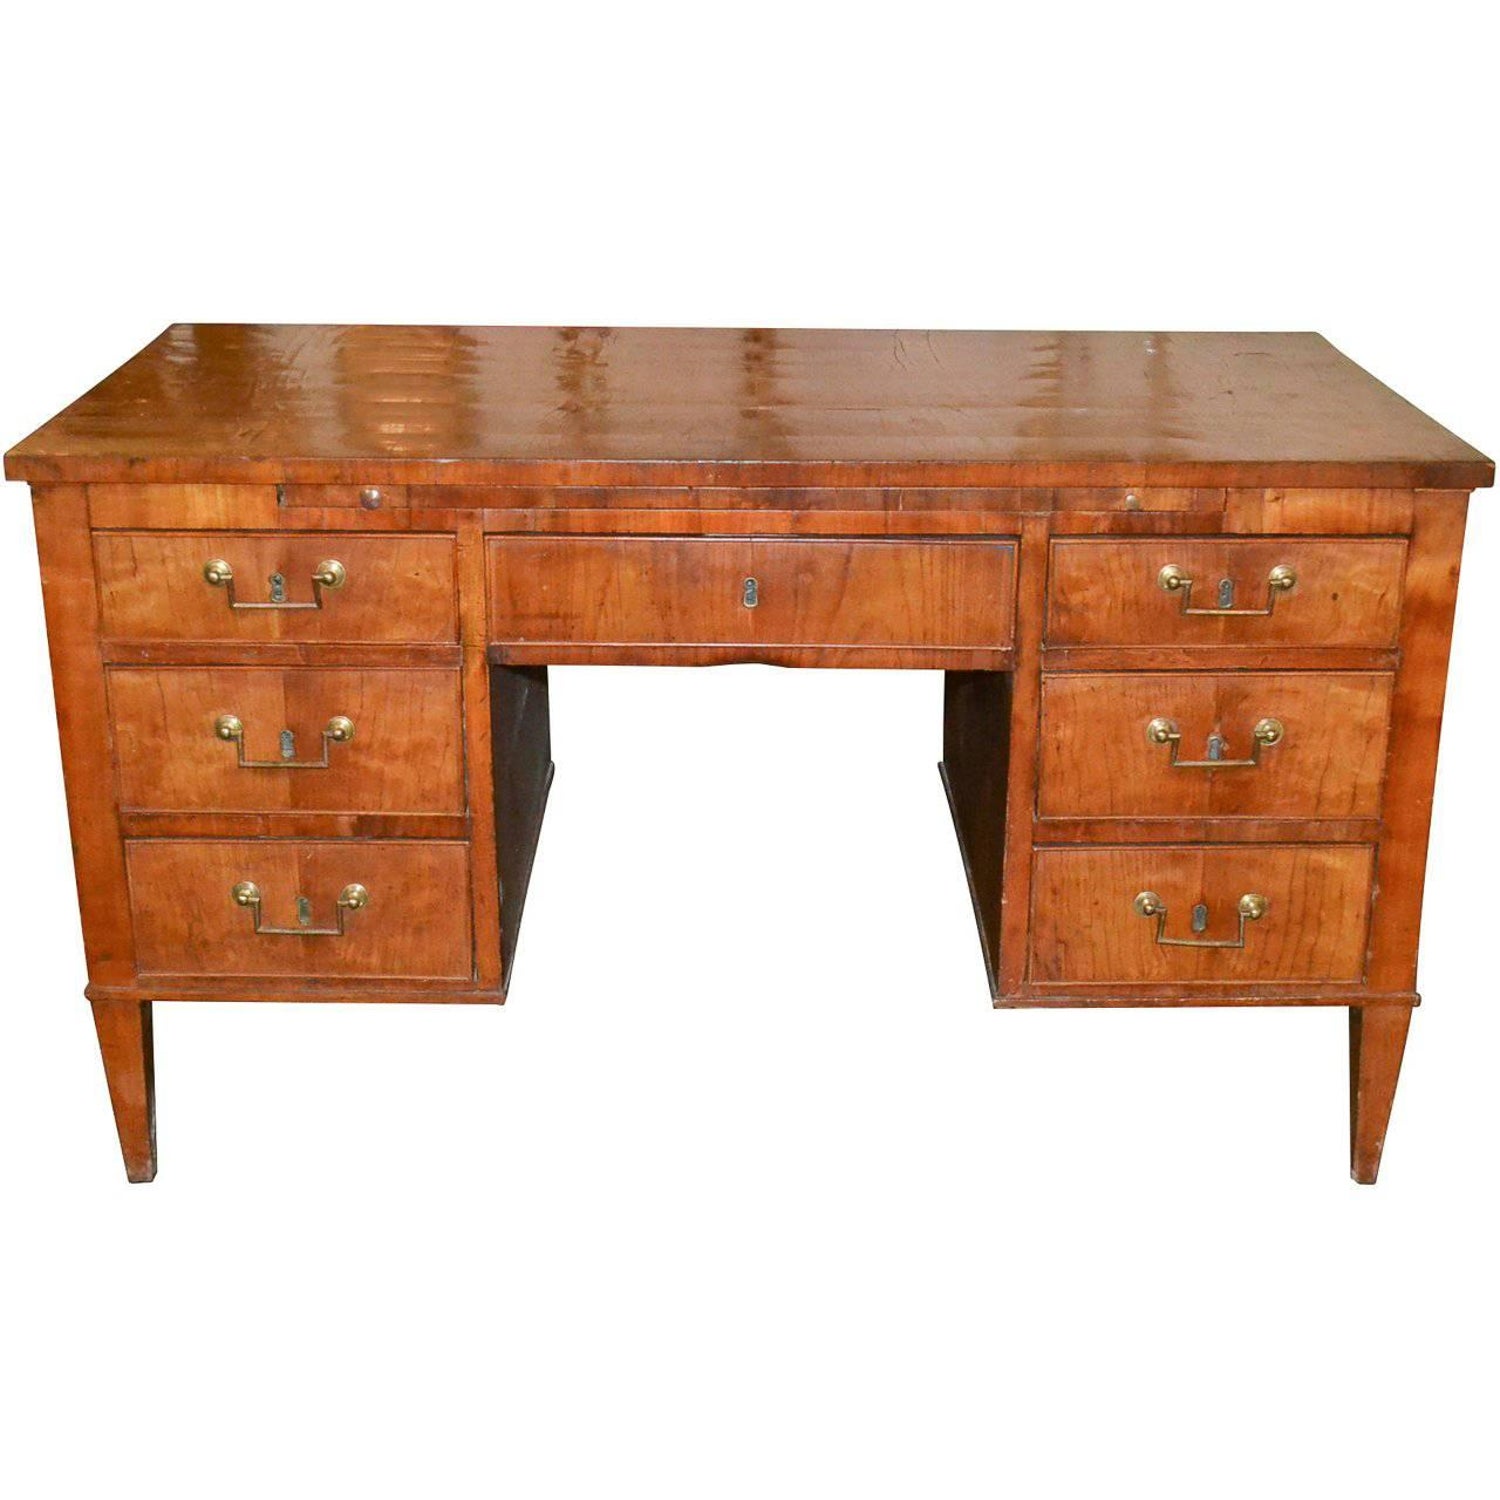 19th Century French Directoire Partners Desk For Sale At 1stdibs